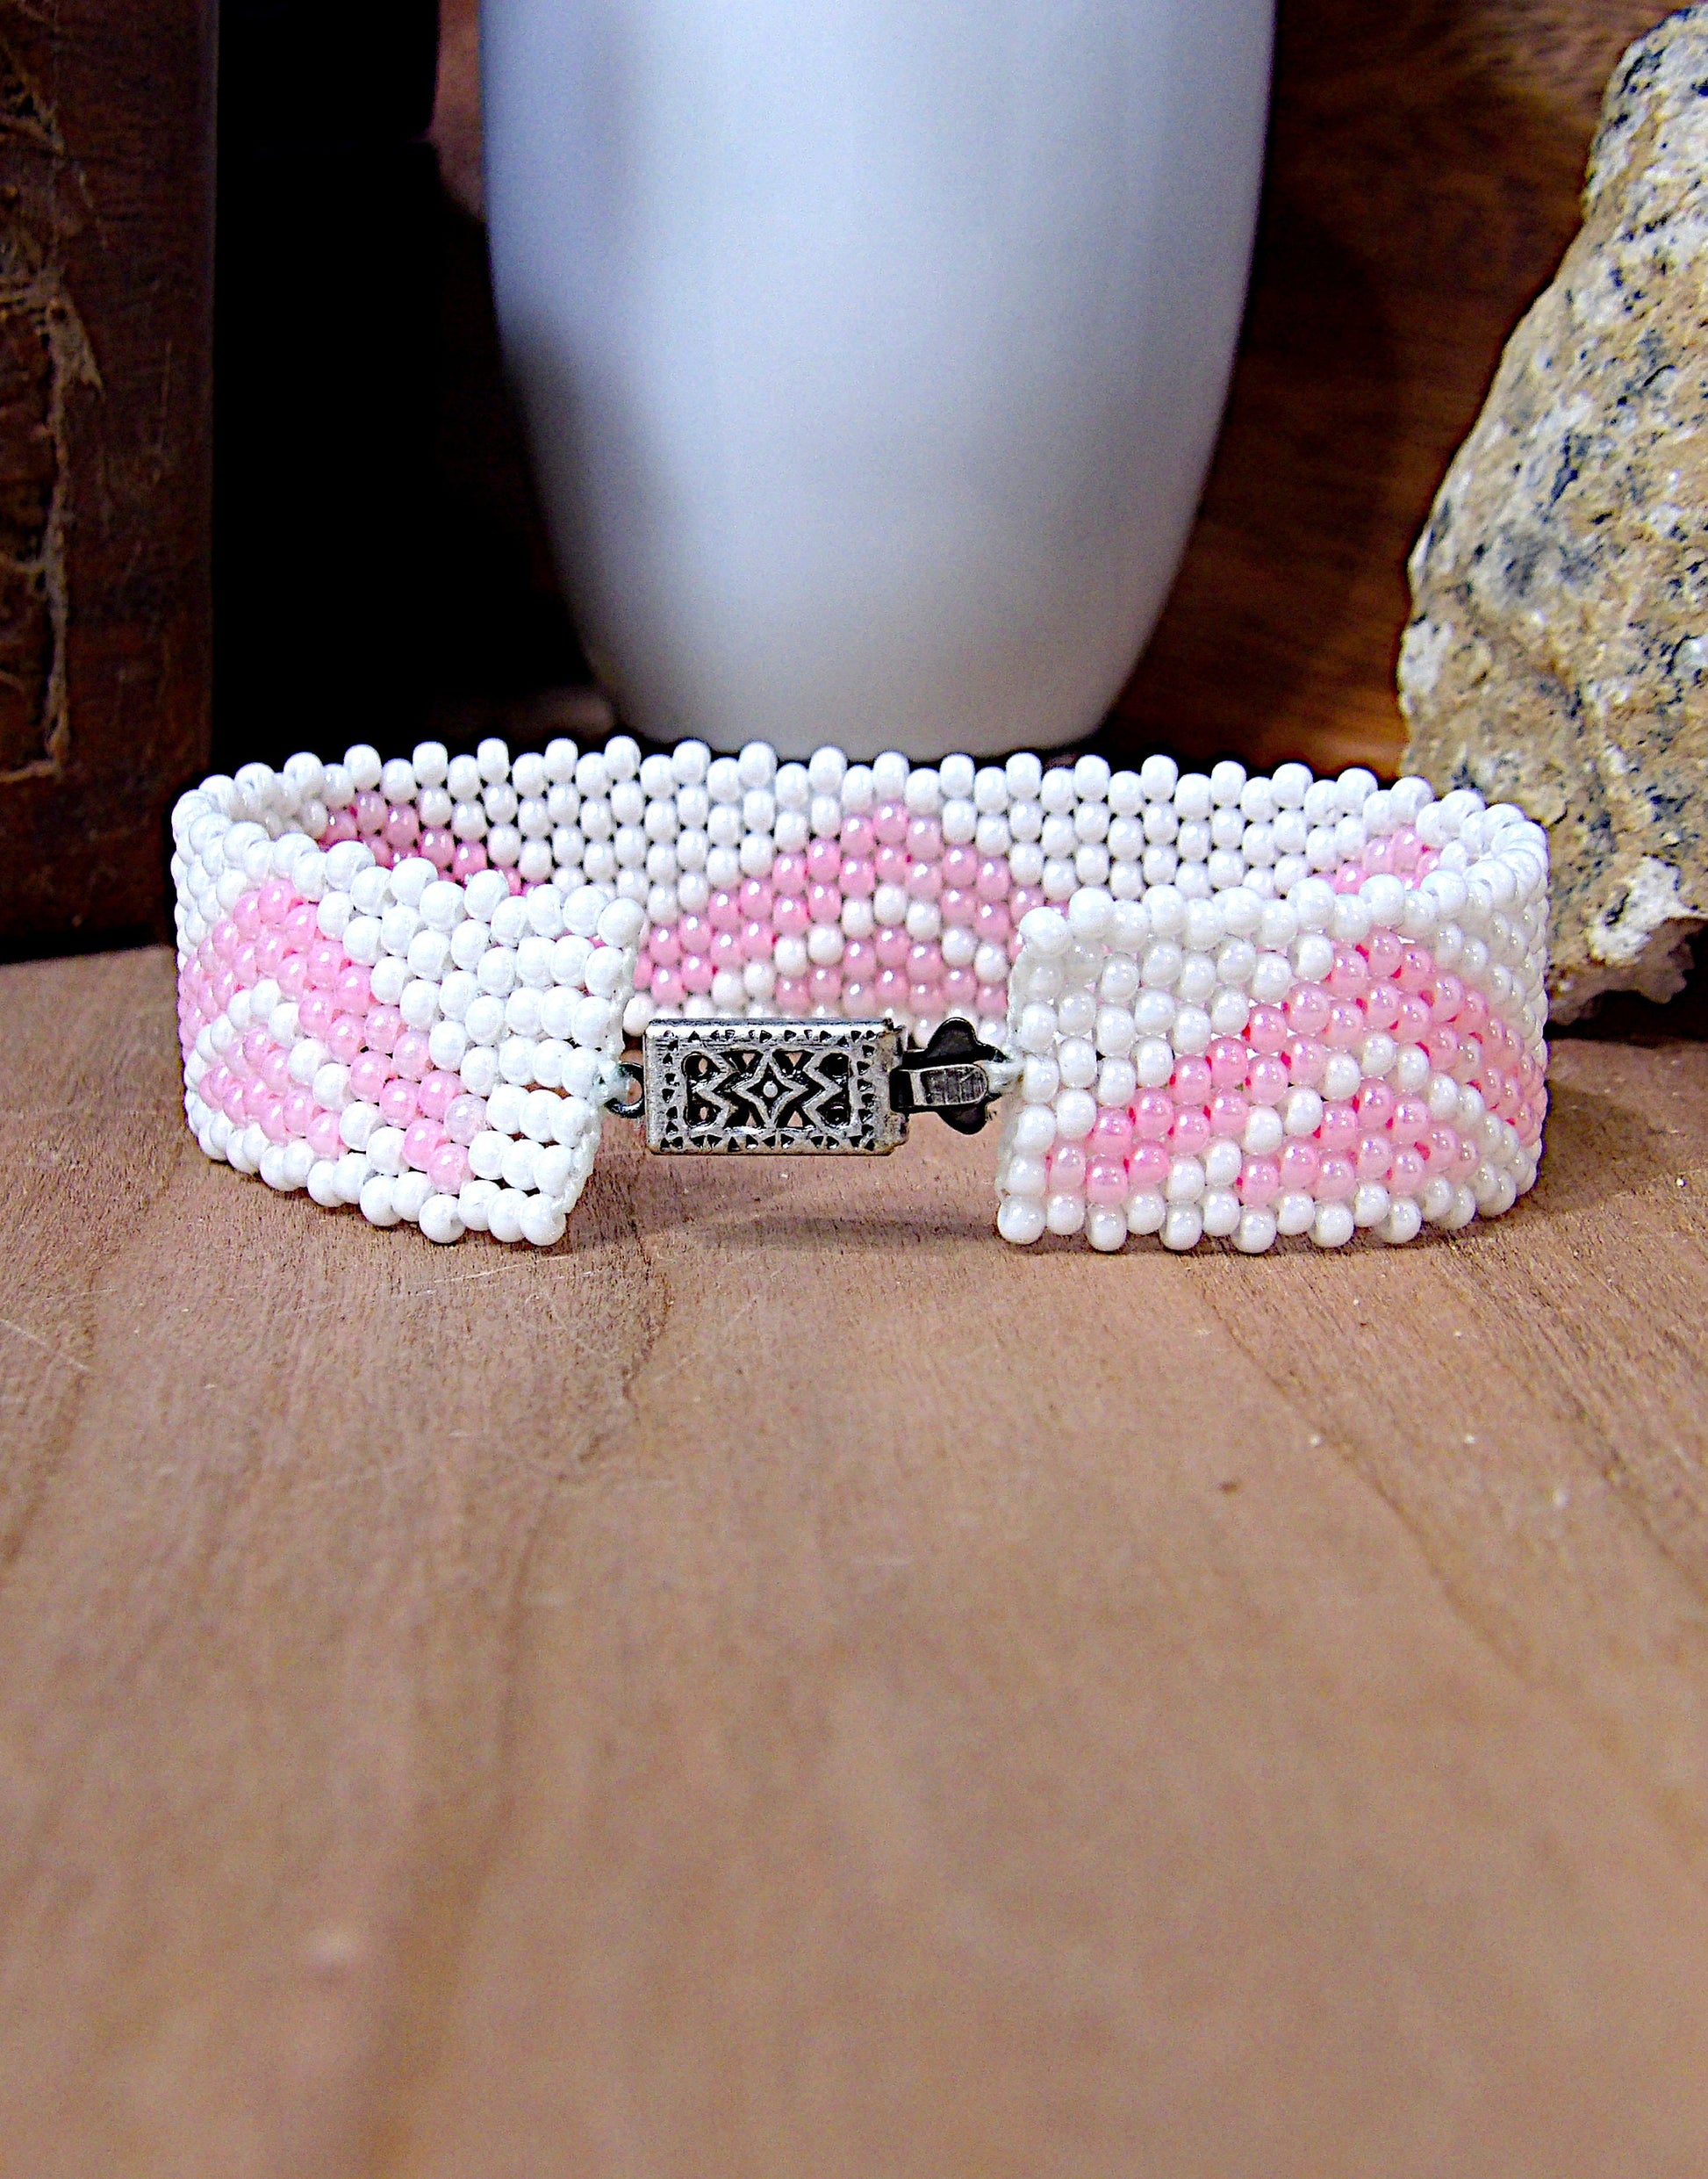 Wide Cuff Triangle Seed Bead Bracelet | 90s Aesthetic | Woven Beadwork | Colorful Boho Bracelet | One Of A Kind Gift | Boutique Jewelry Gift